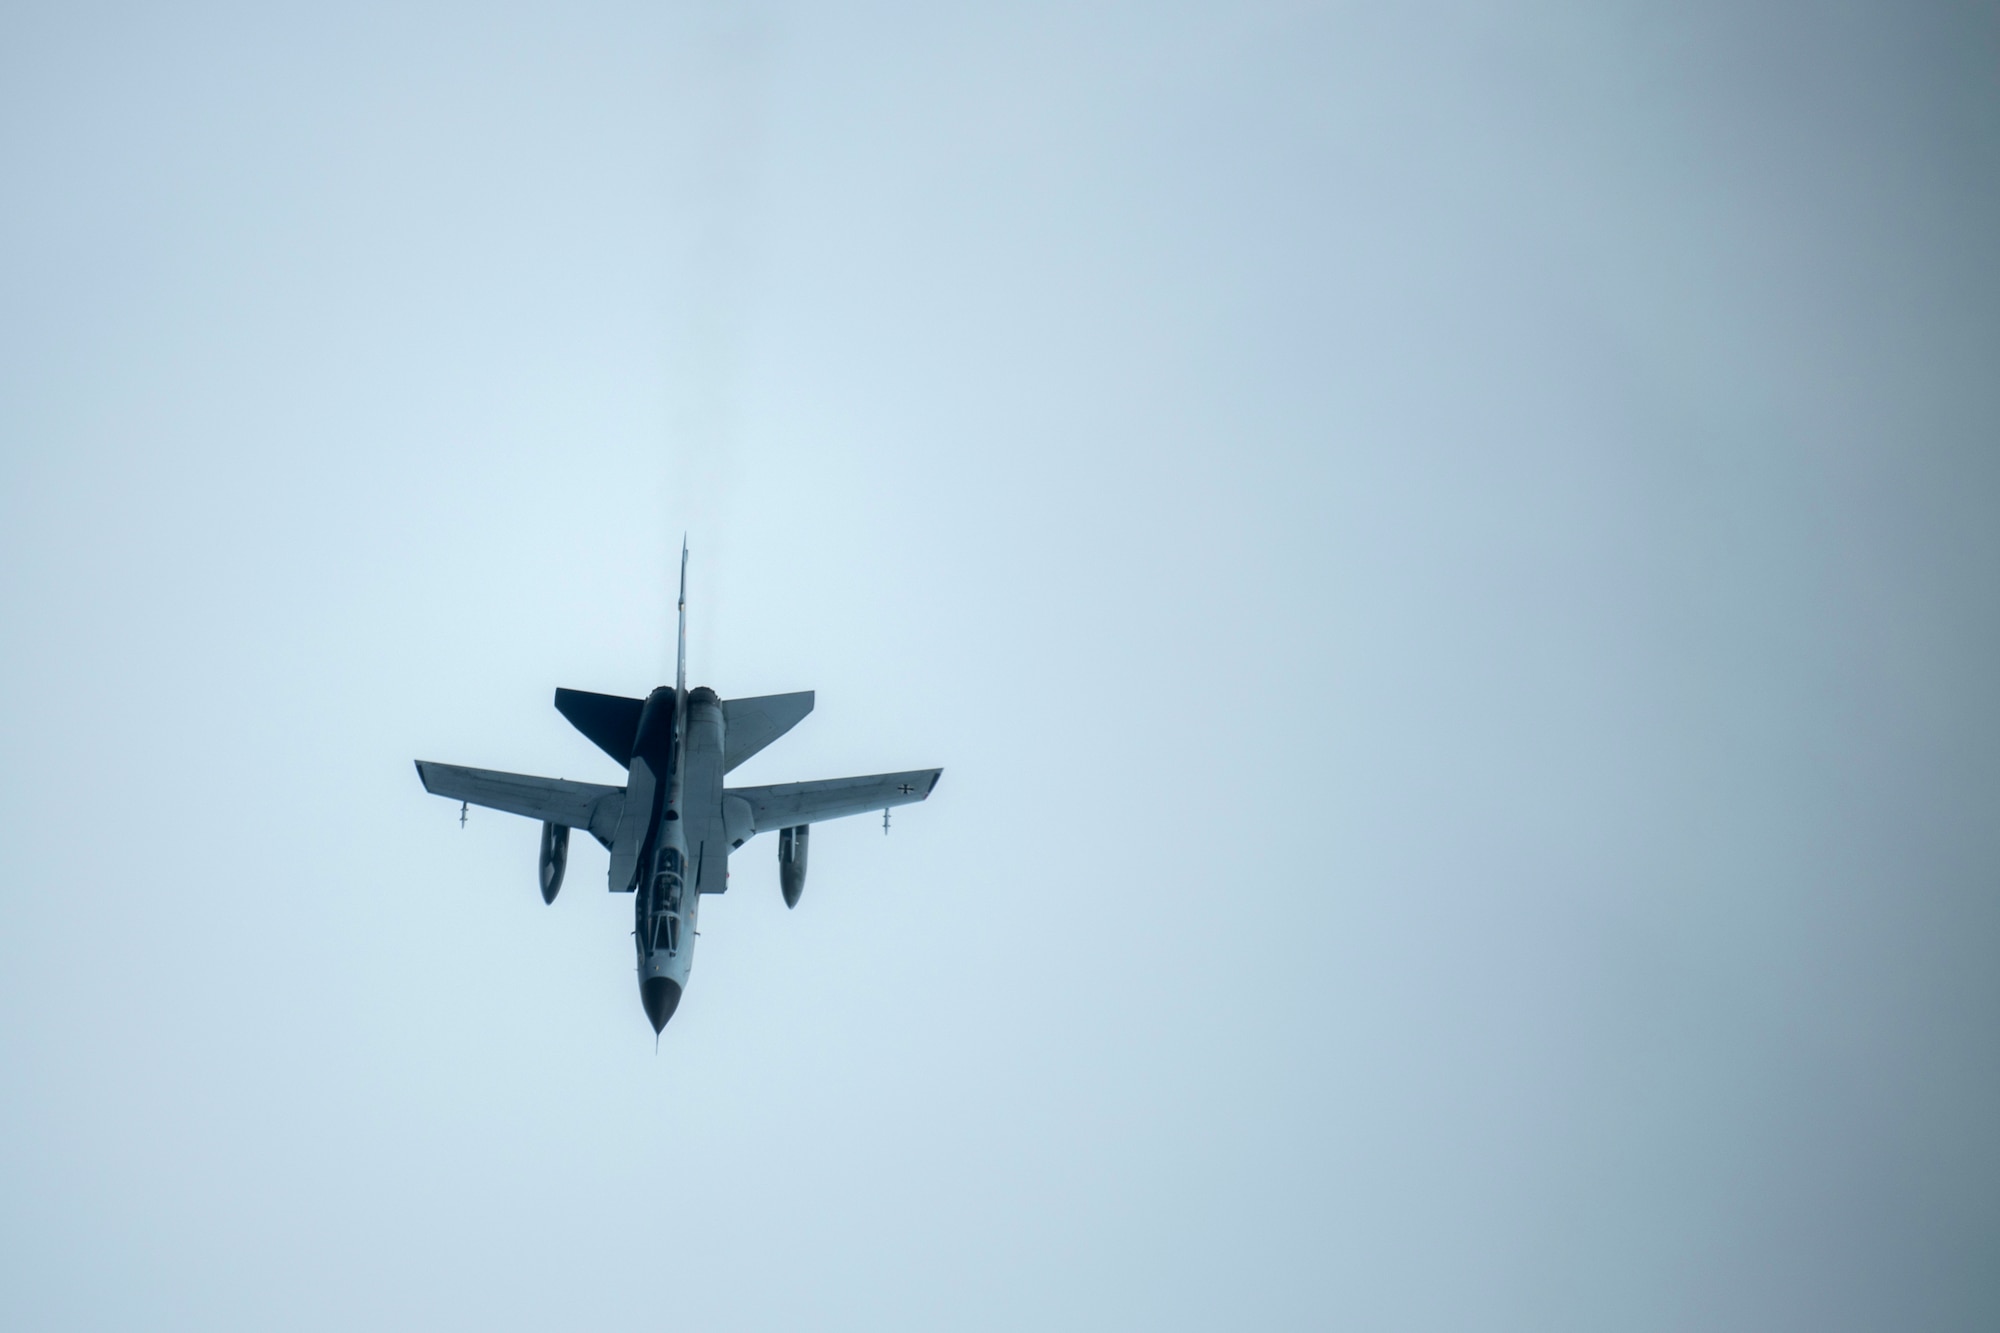 Military fighter aircraft in midair.